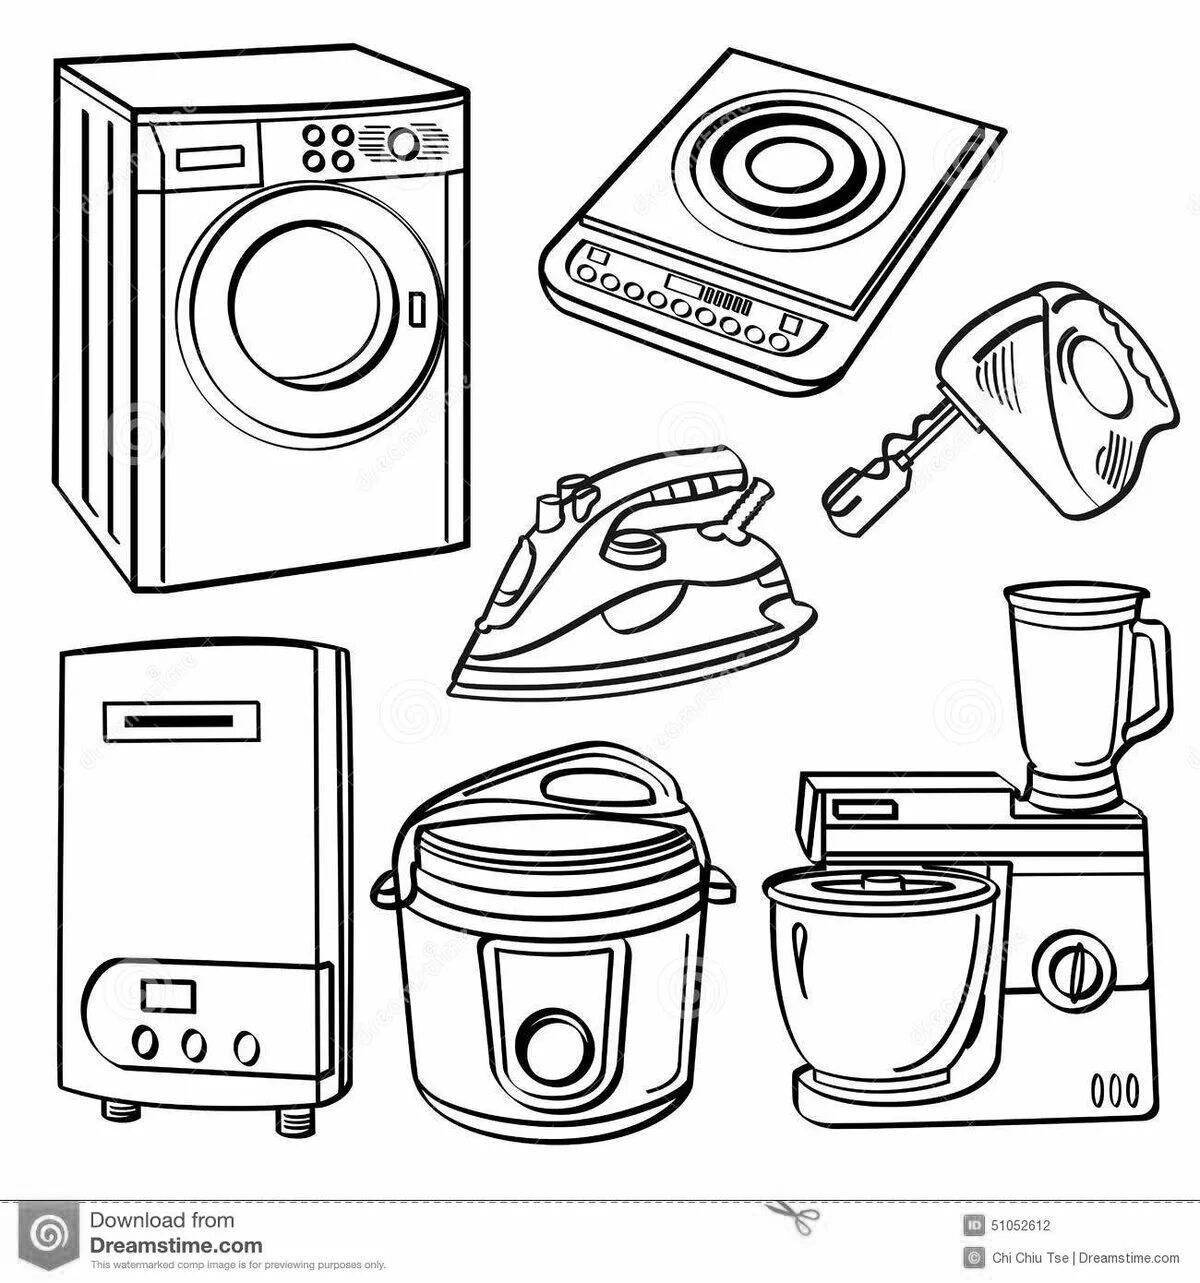 Colourful coloring pages of household appliances for children 3-4 years old